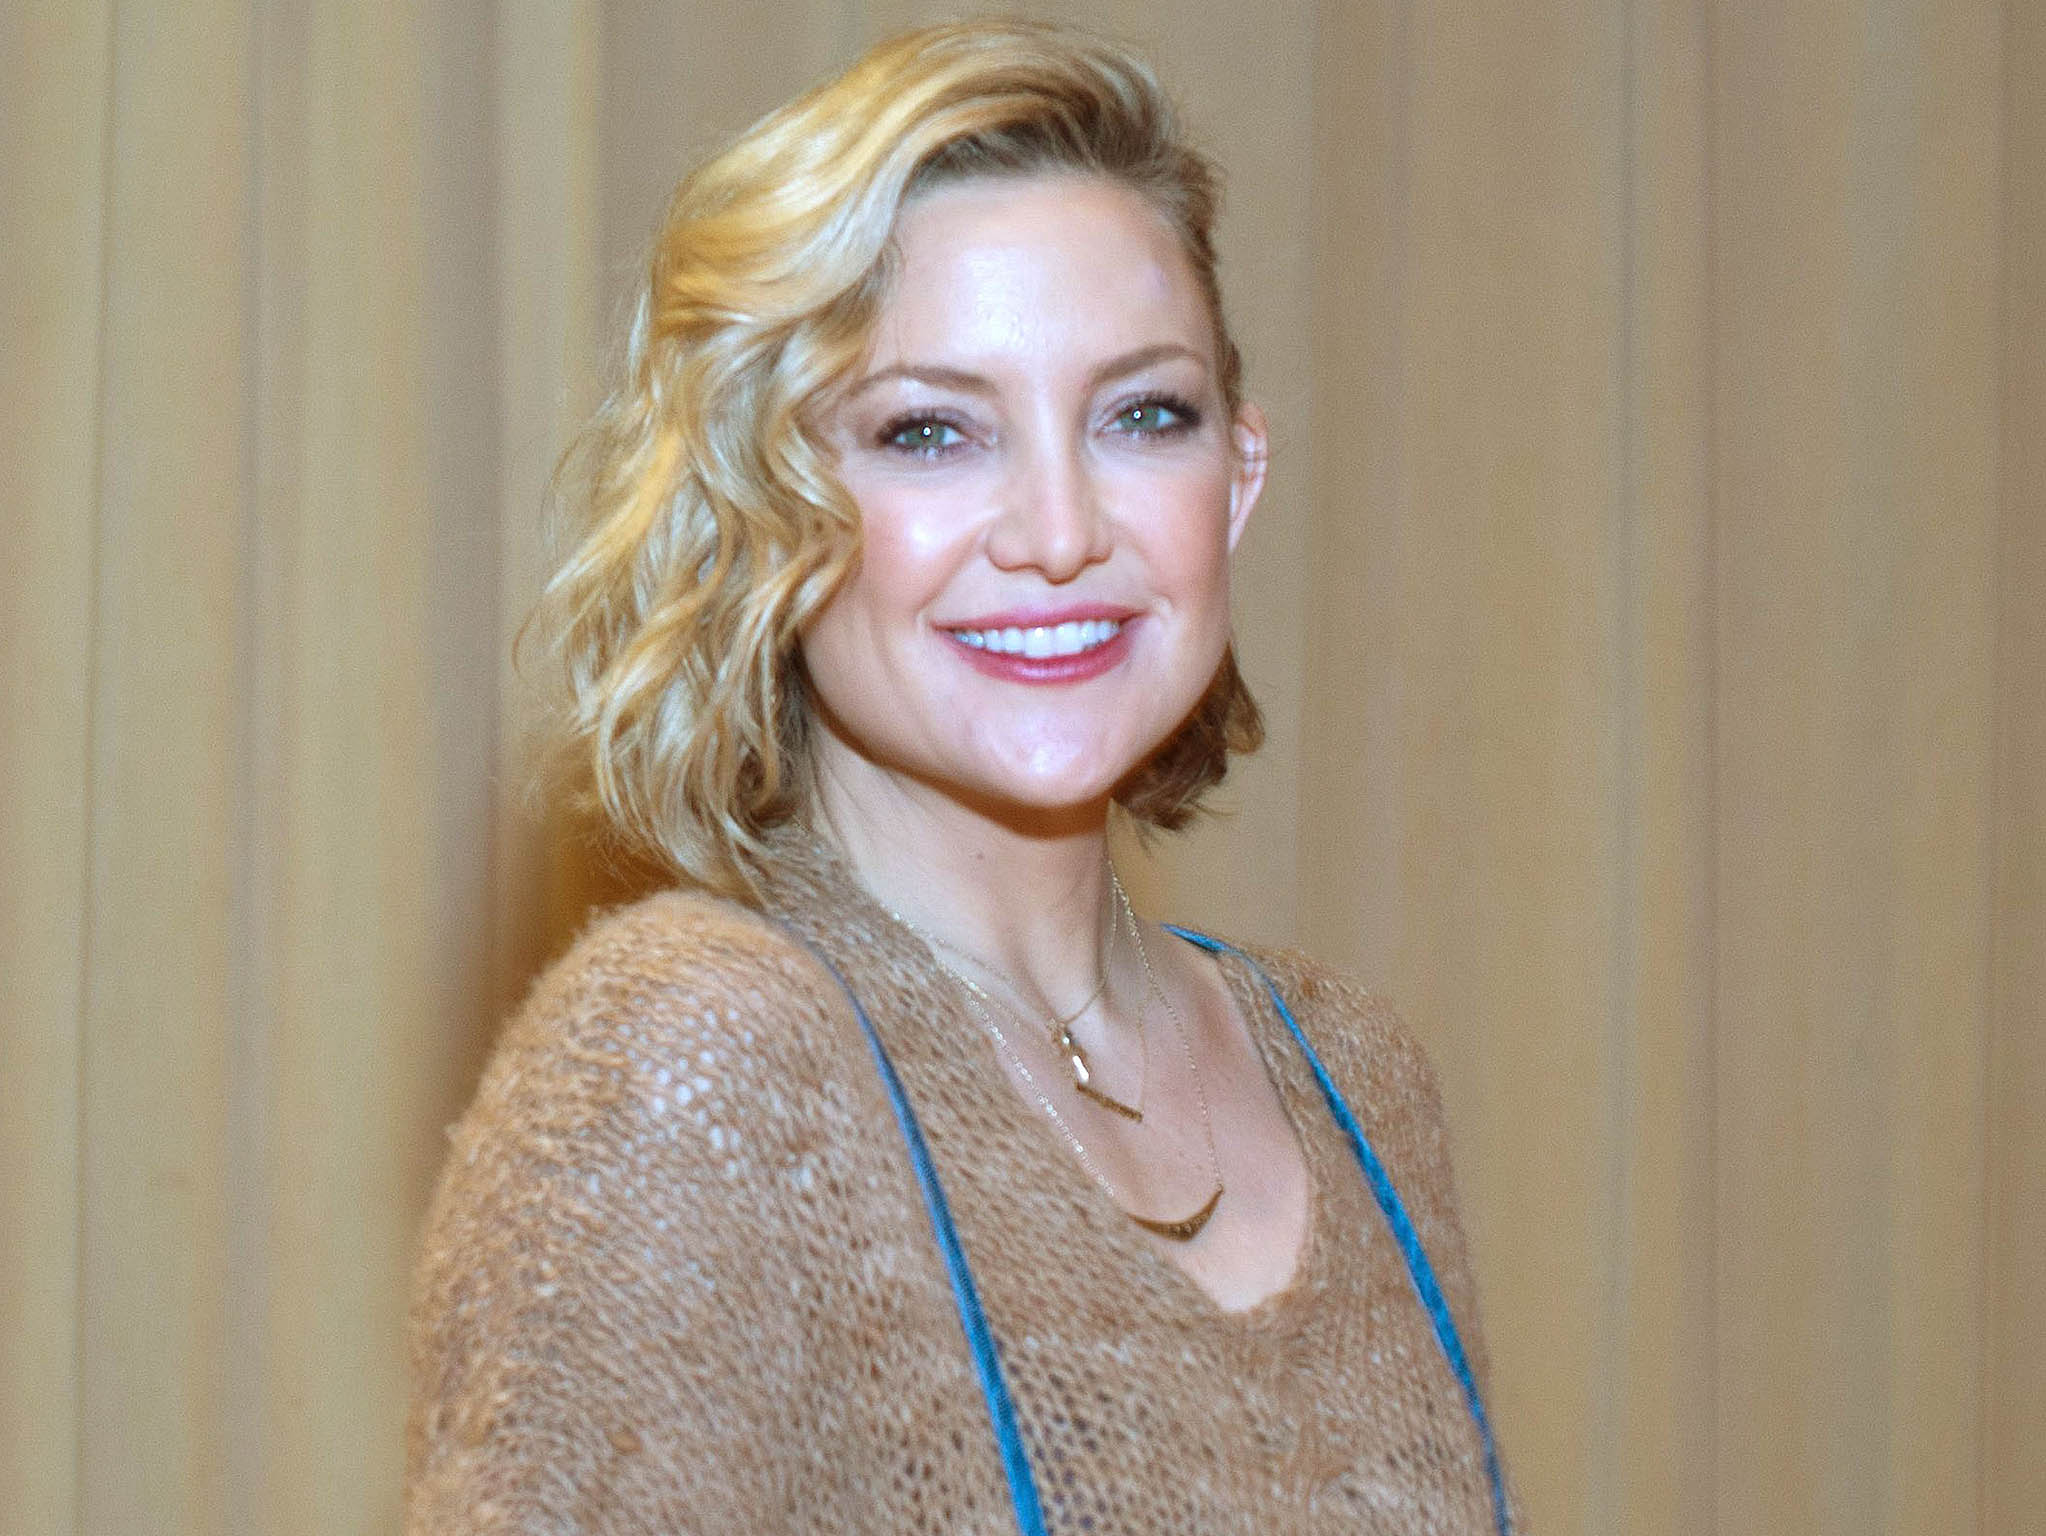 Golden smile: Kate Hudson, who has a new book about how to be happy Cindy Barrymore/REX